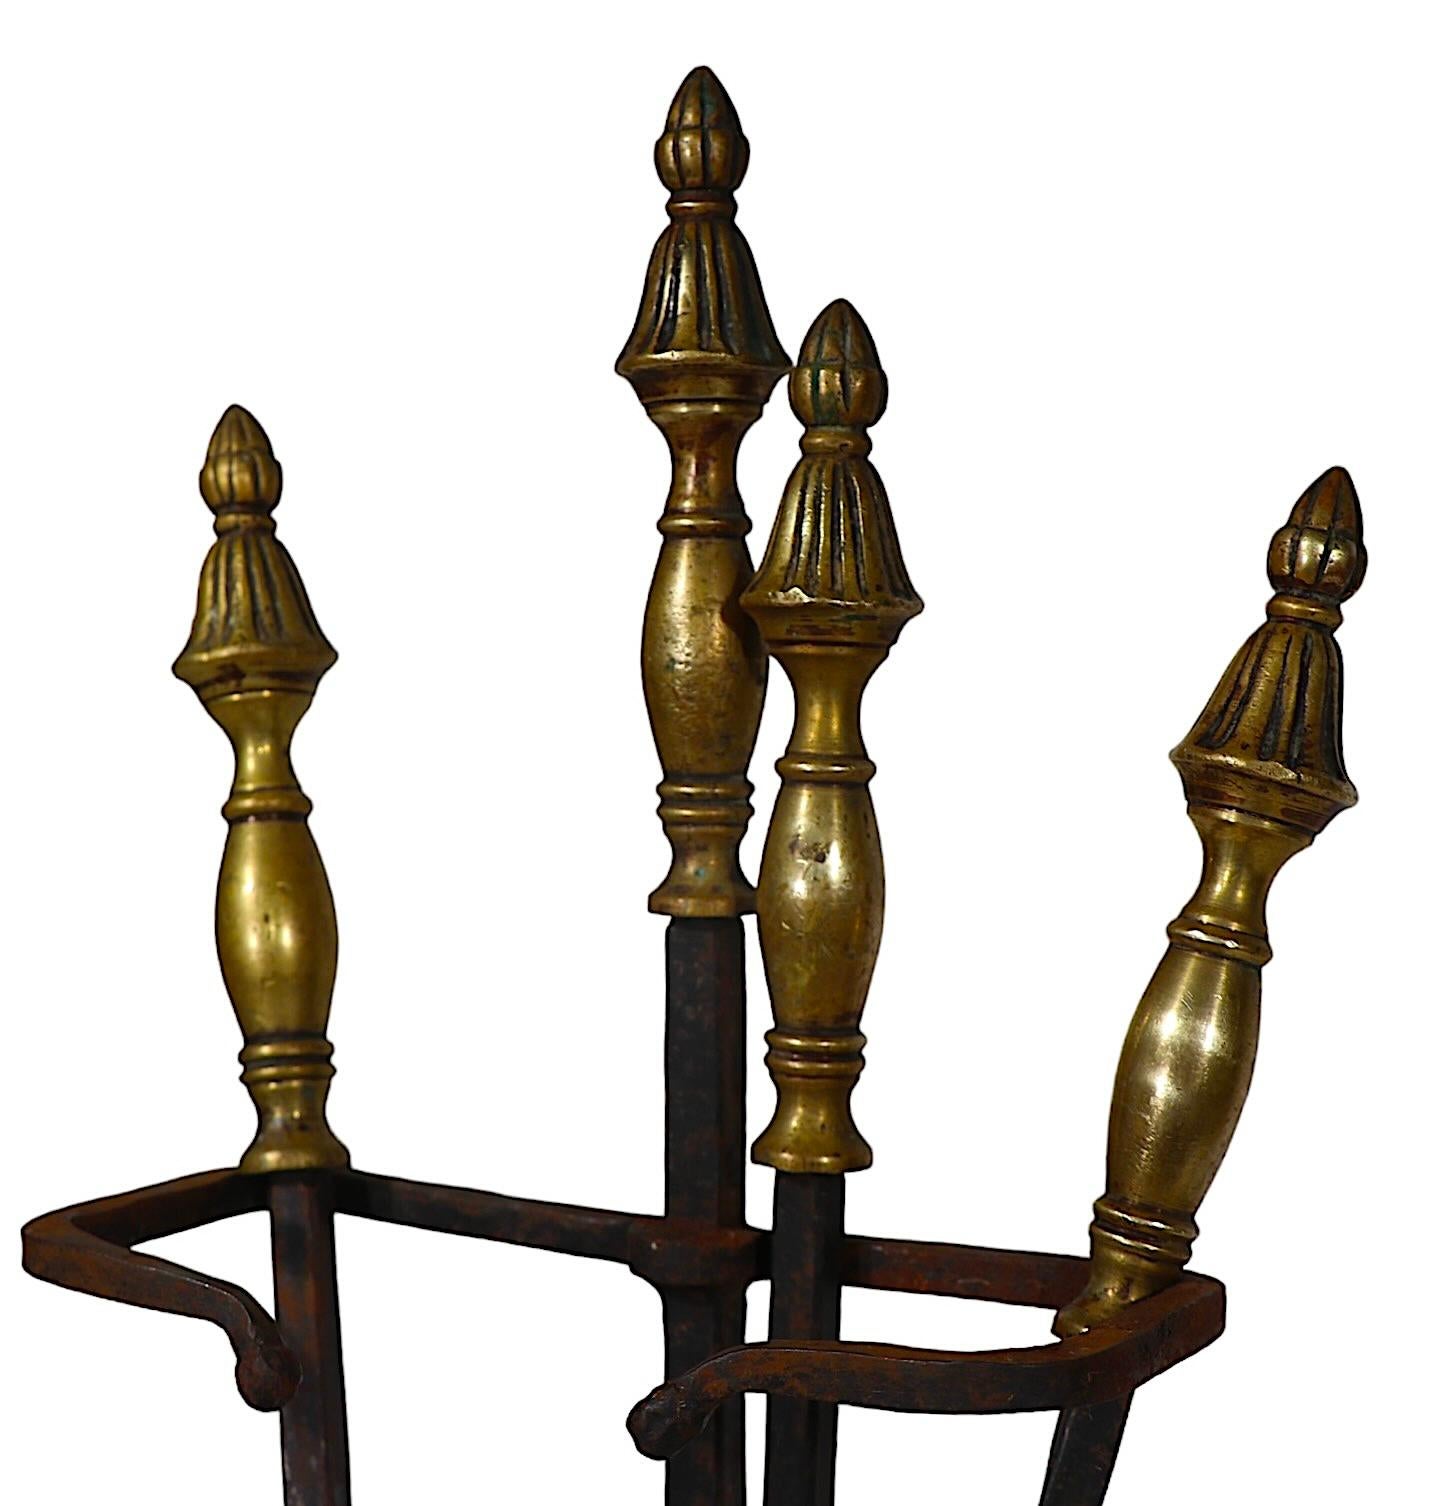 Four piece wrought iron and cast brass fireplace tool set, including a poker, shovel, tongs, and the stand. The set is in good, original, clean and ready to use condition, showing some  cosmetic wear to its surface, normal and consistent with age. 